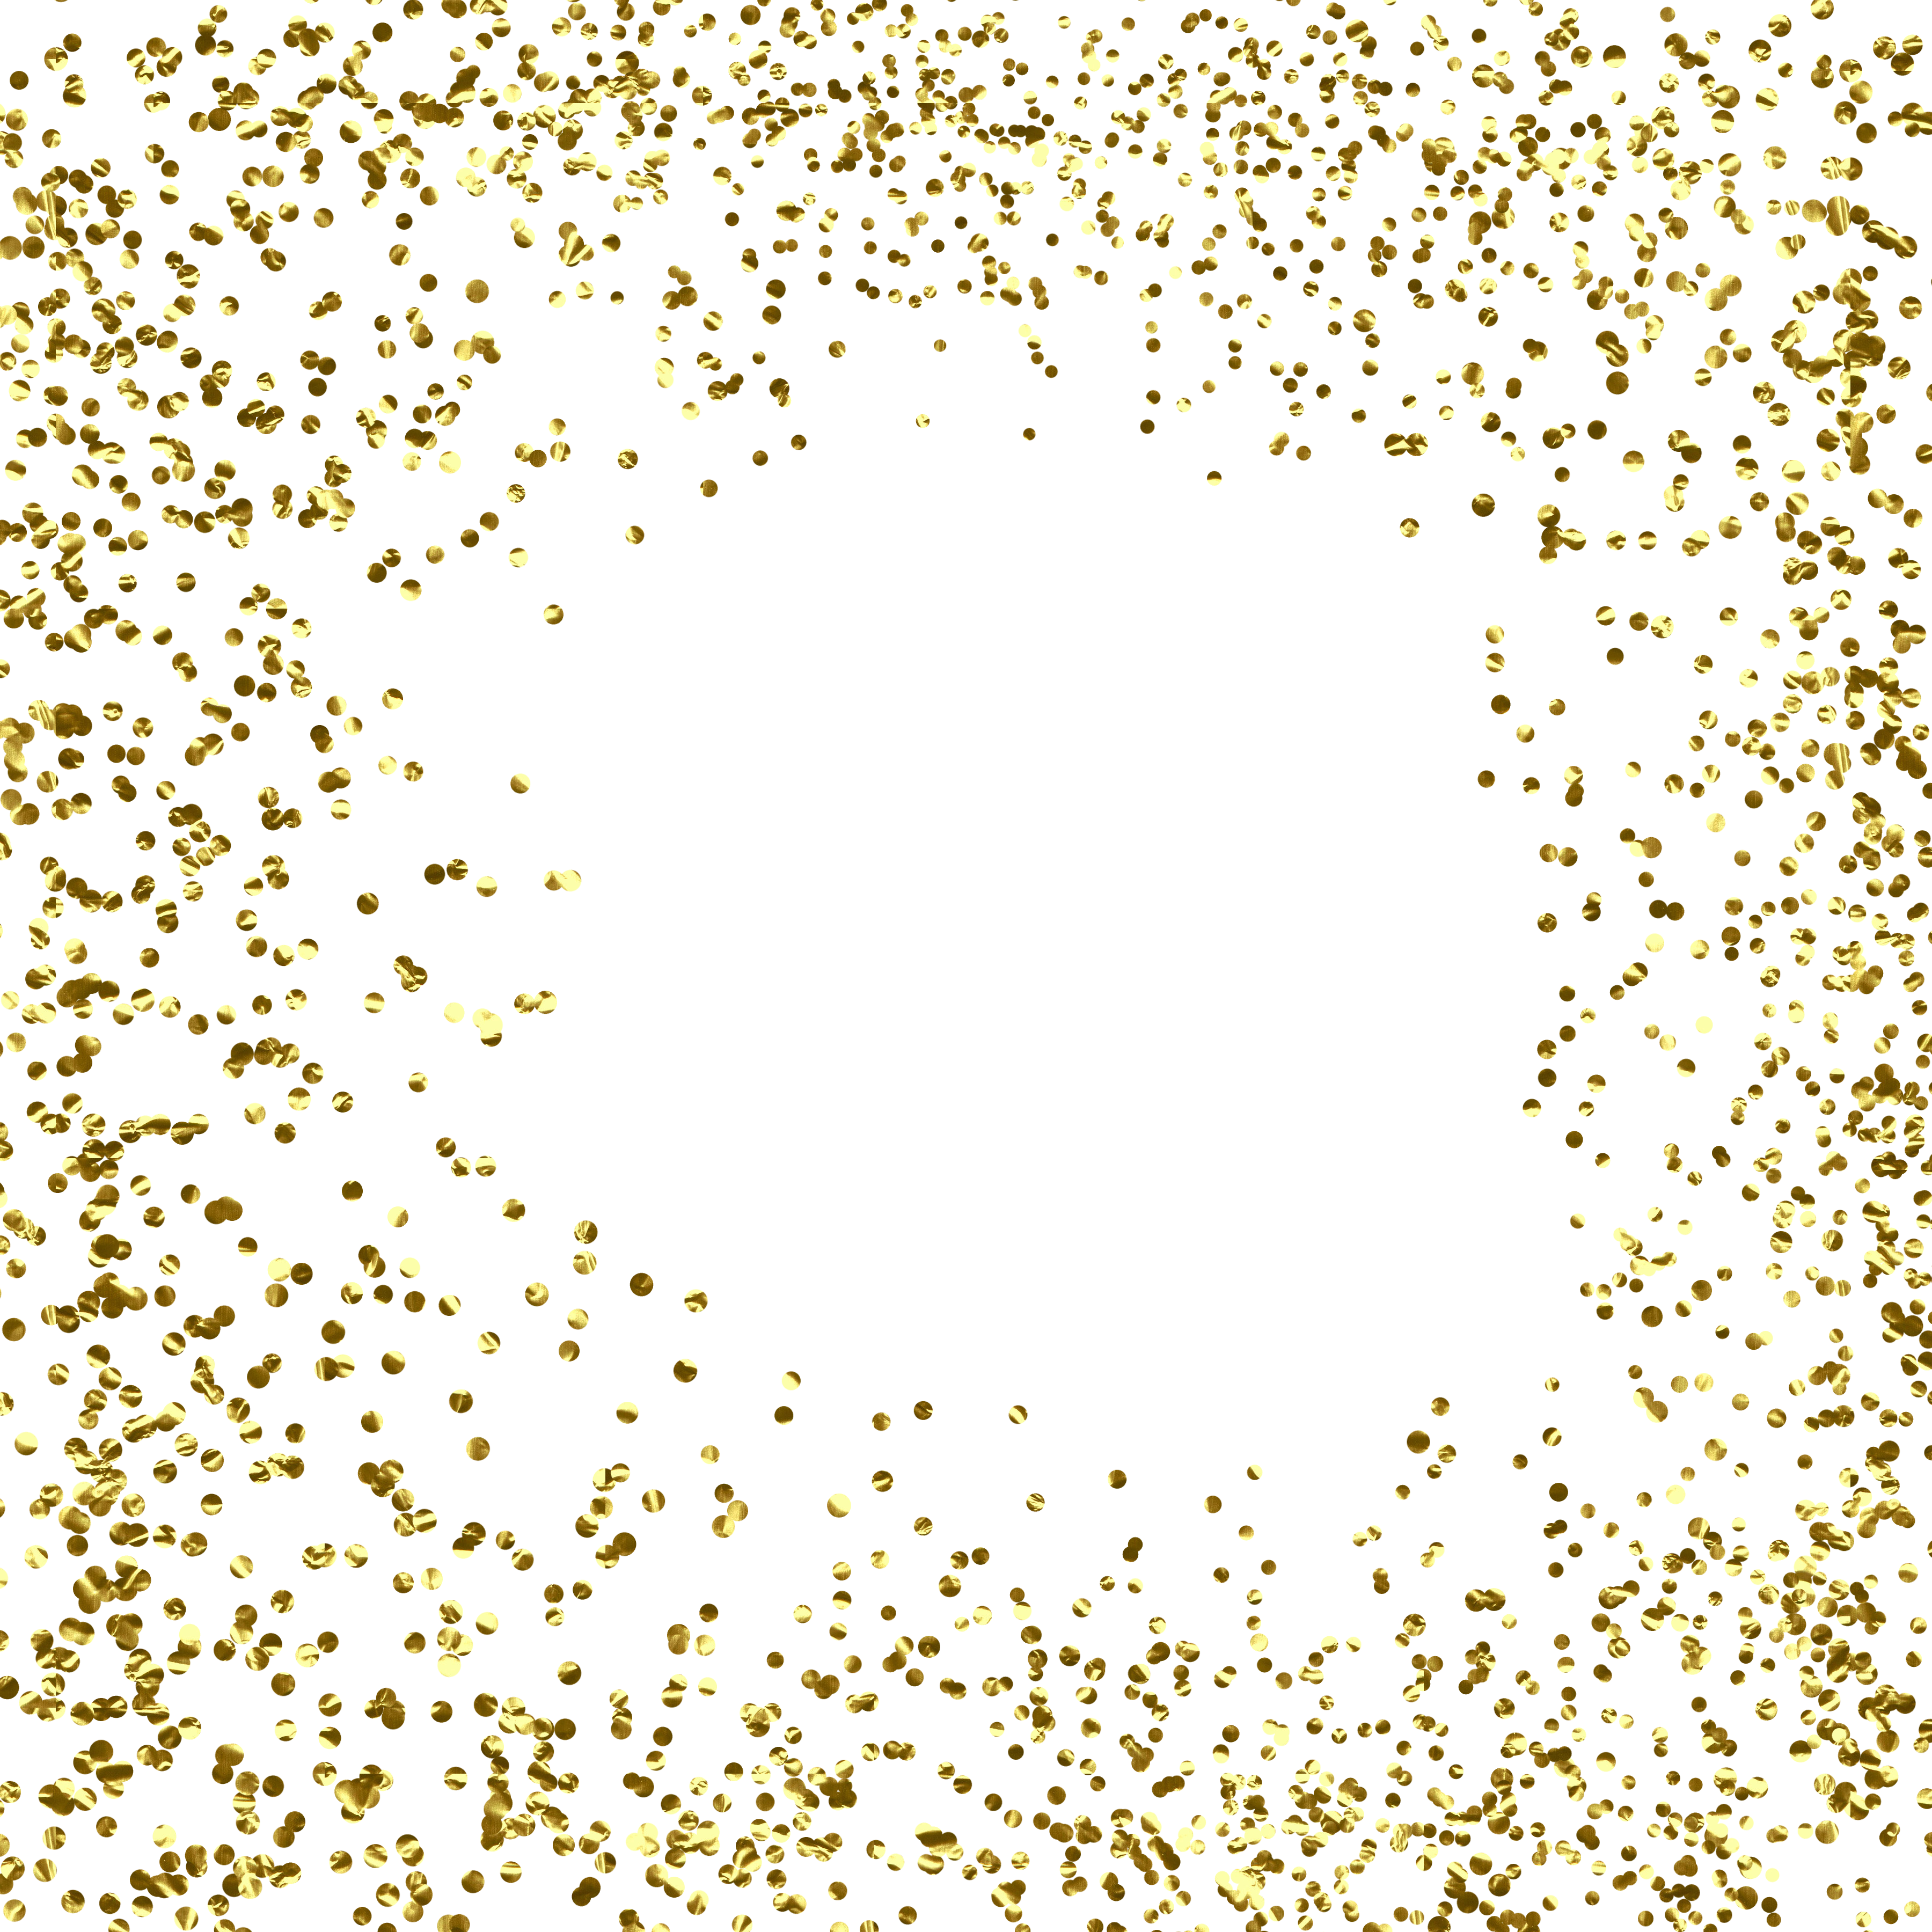 Gold Glitter Png Images Collection Transparent Lines Gold Glitter Free Download Free Transparent Png Logos